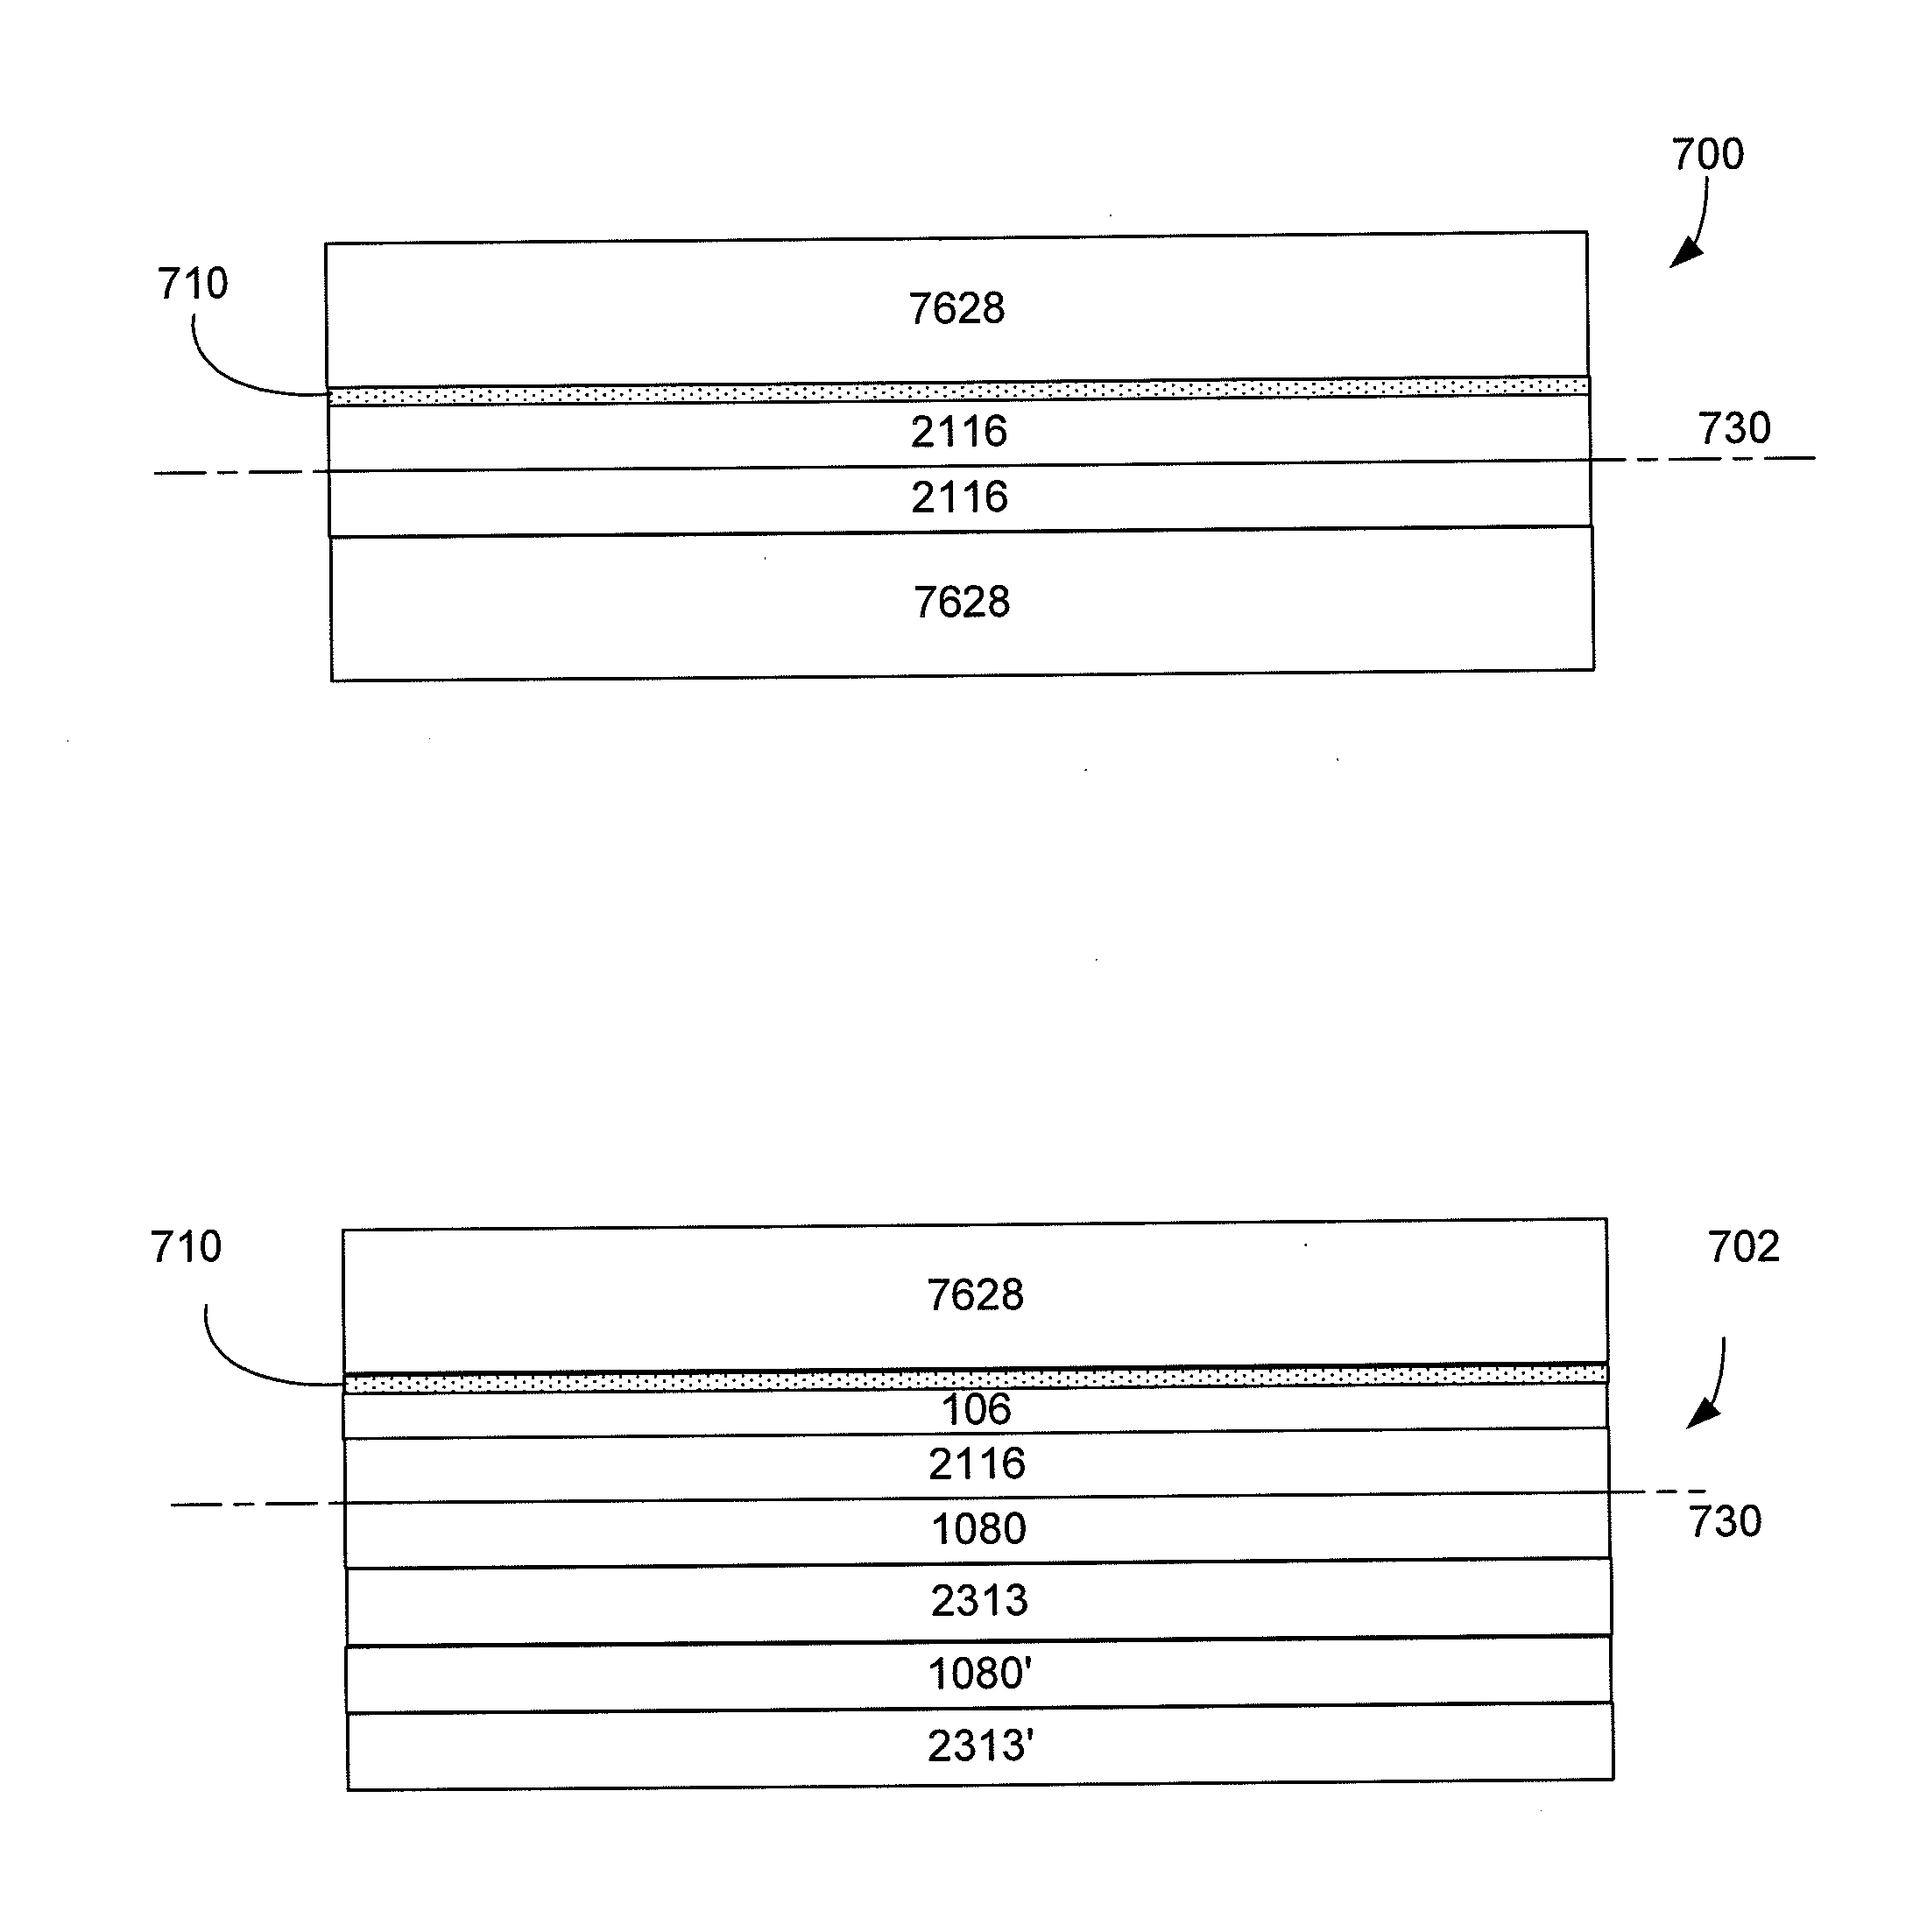 Substrates Having Voltage Switchable Dielectric Materials